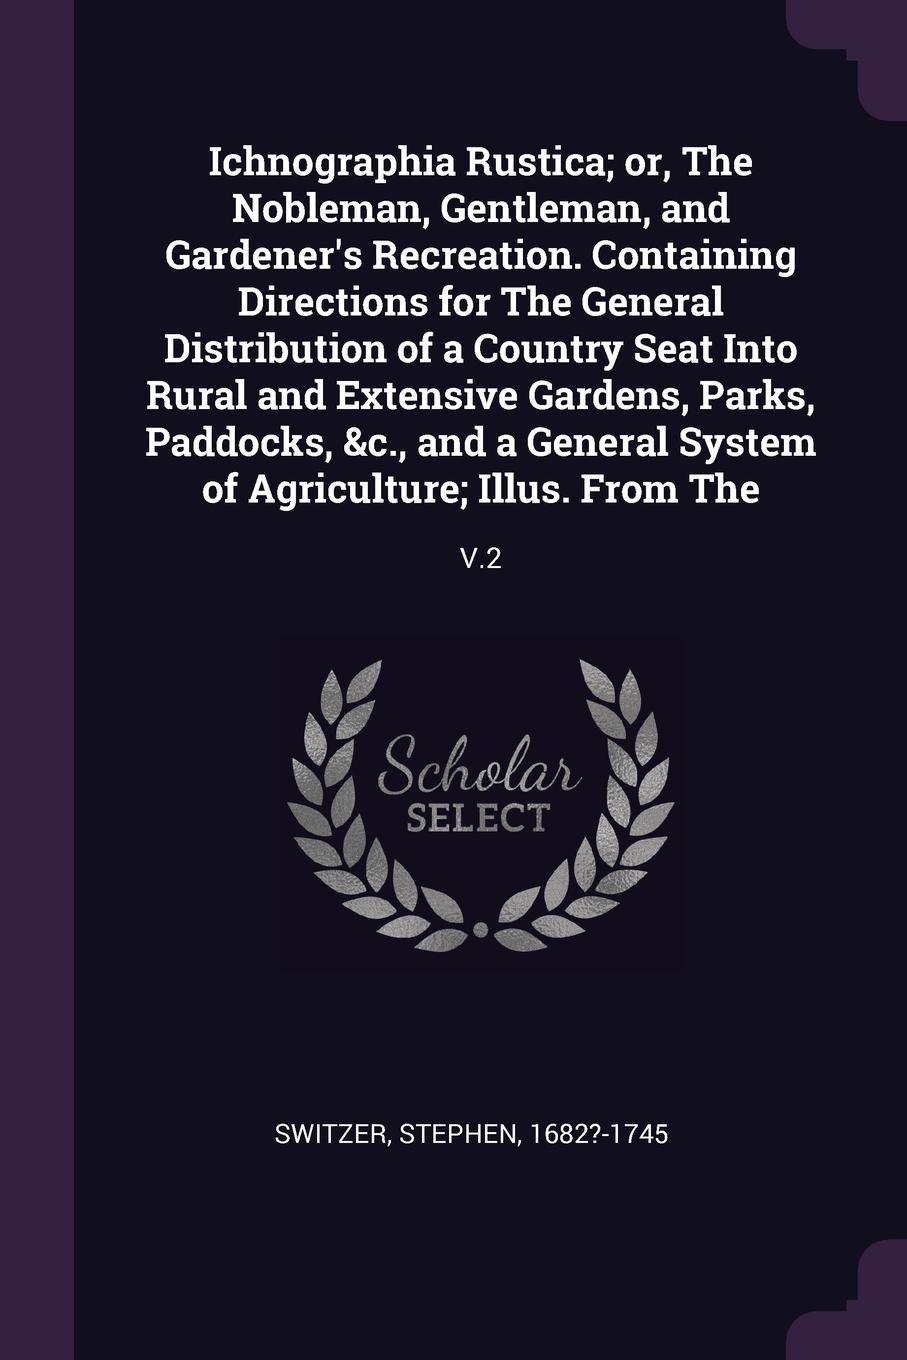 Ichnographia Rustica; or, The Nobleman, Gentleman, and Gardener`s Recreation. Containing Directions for The General Distribution of a Country Seat Into Rural and Extensive Gardens, Parks, Paddocks, &c., and a General System of Agriculture; Illus. ...